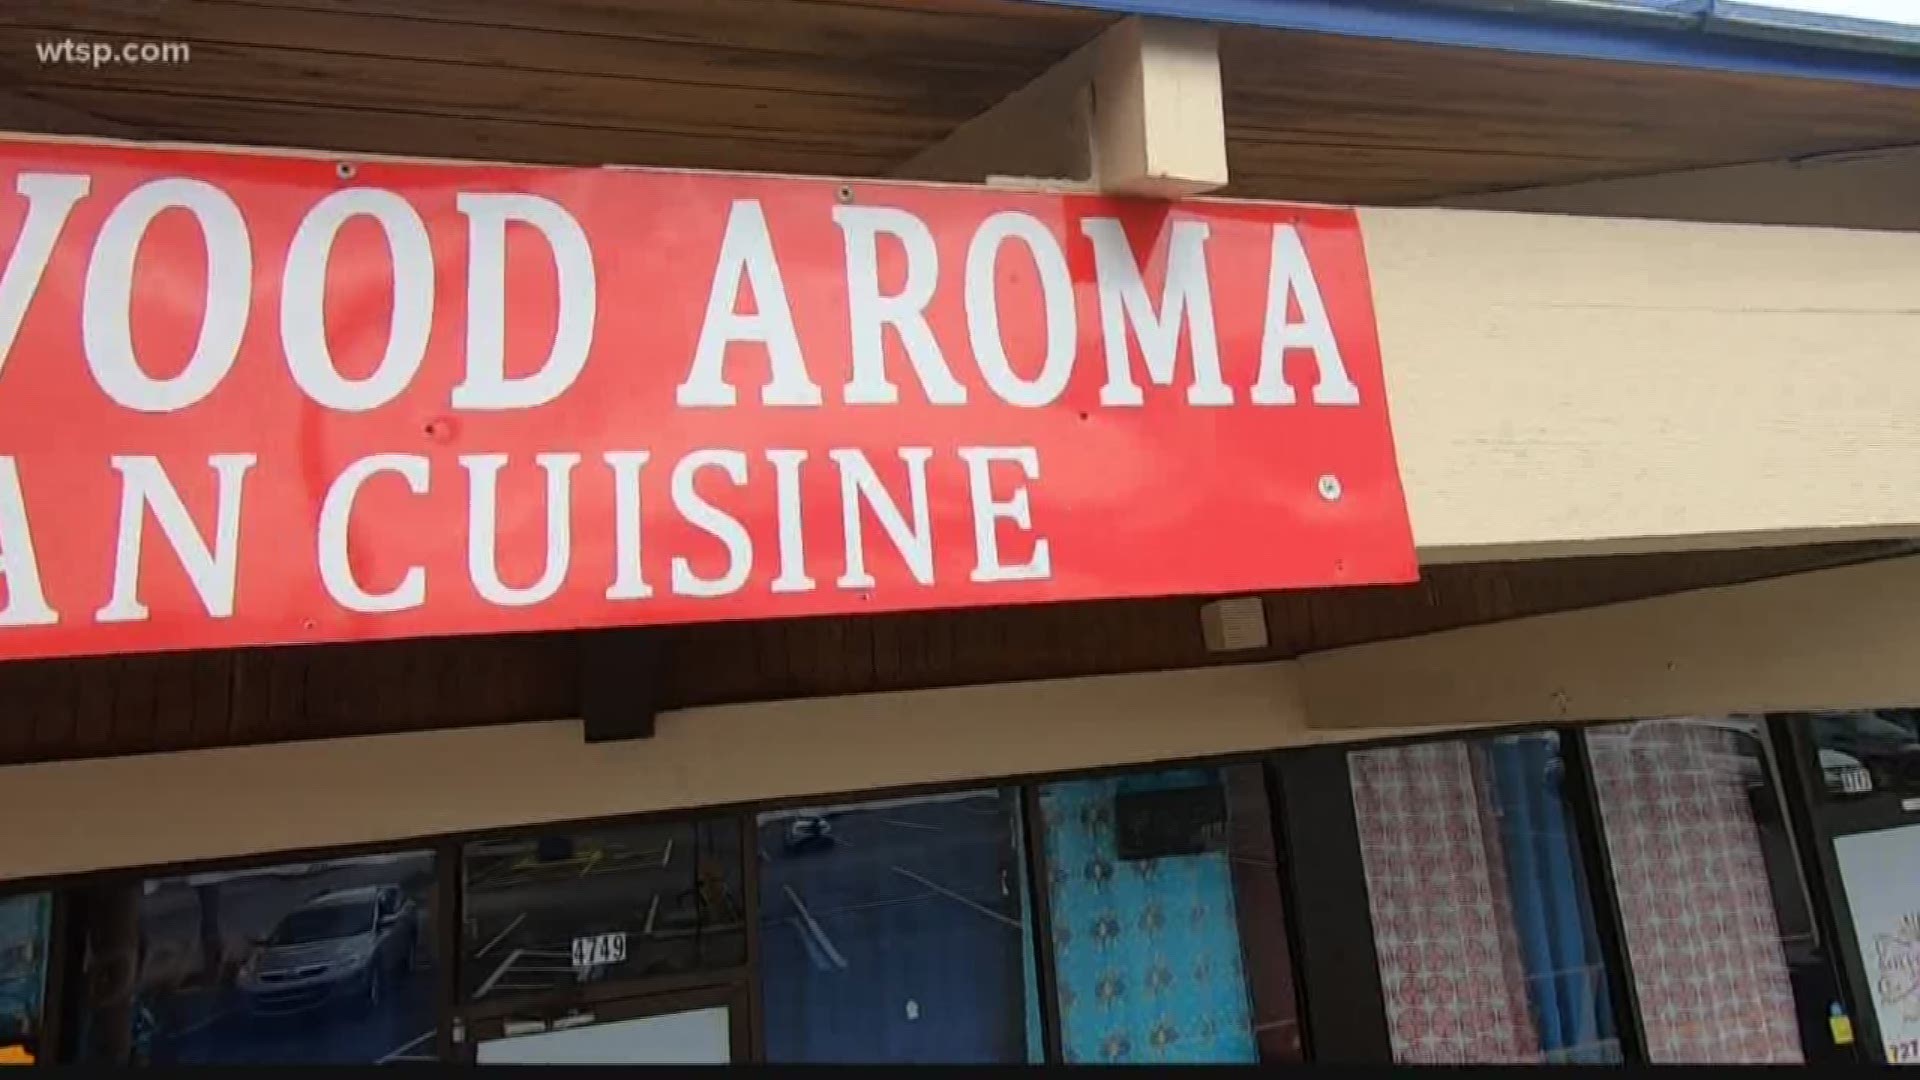 Bollywood Aroma Indian Cuisine has not been able to pass any of their 15 re-inspections since their original closure Jan. 14.